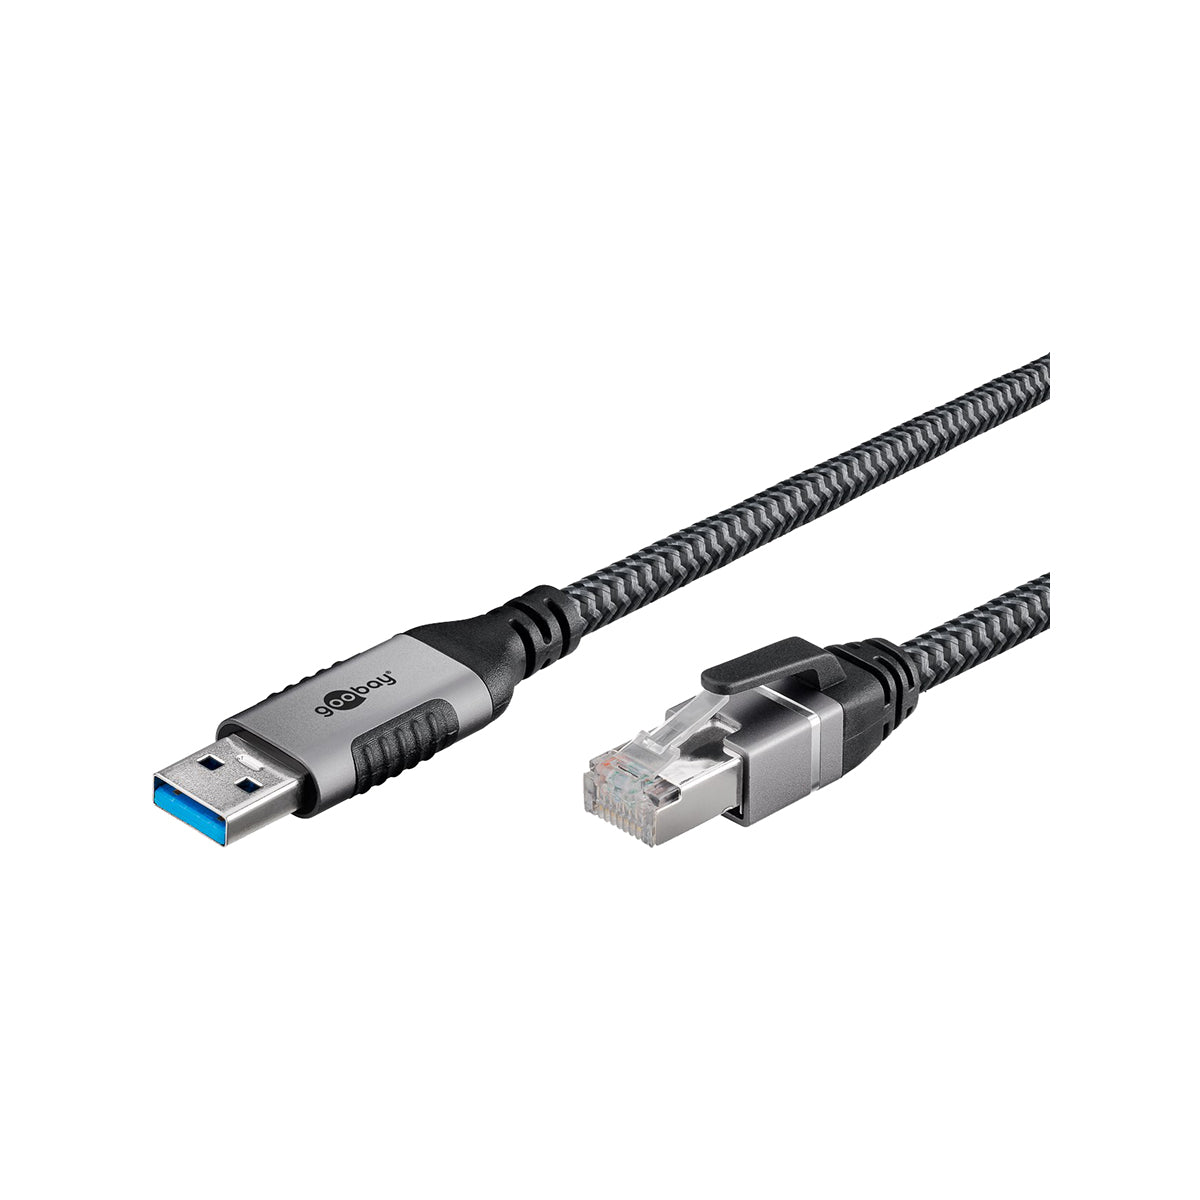 GooBay USB-A 3.0 to RJ45 Ethernet Cable 7.5m for PC/Laptop - Black